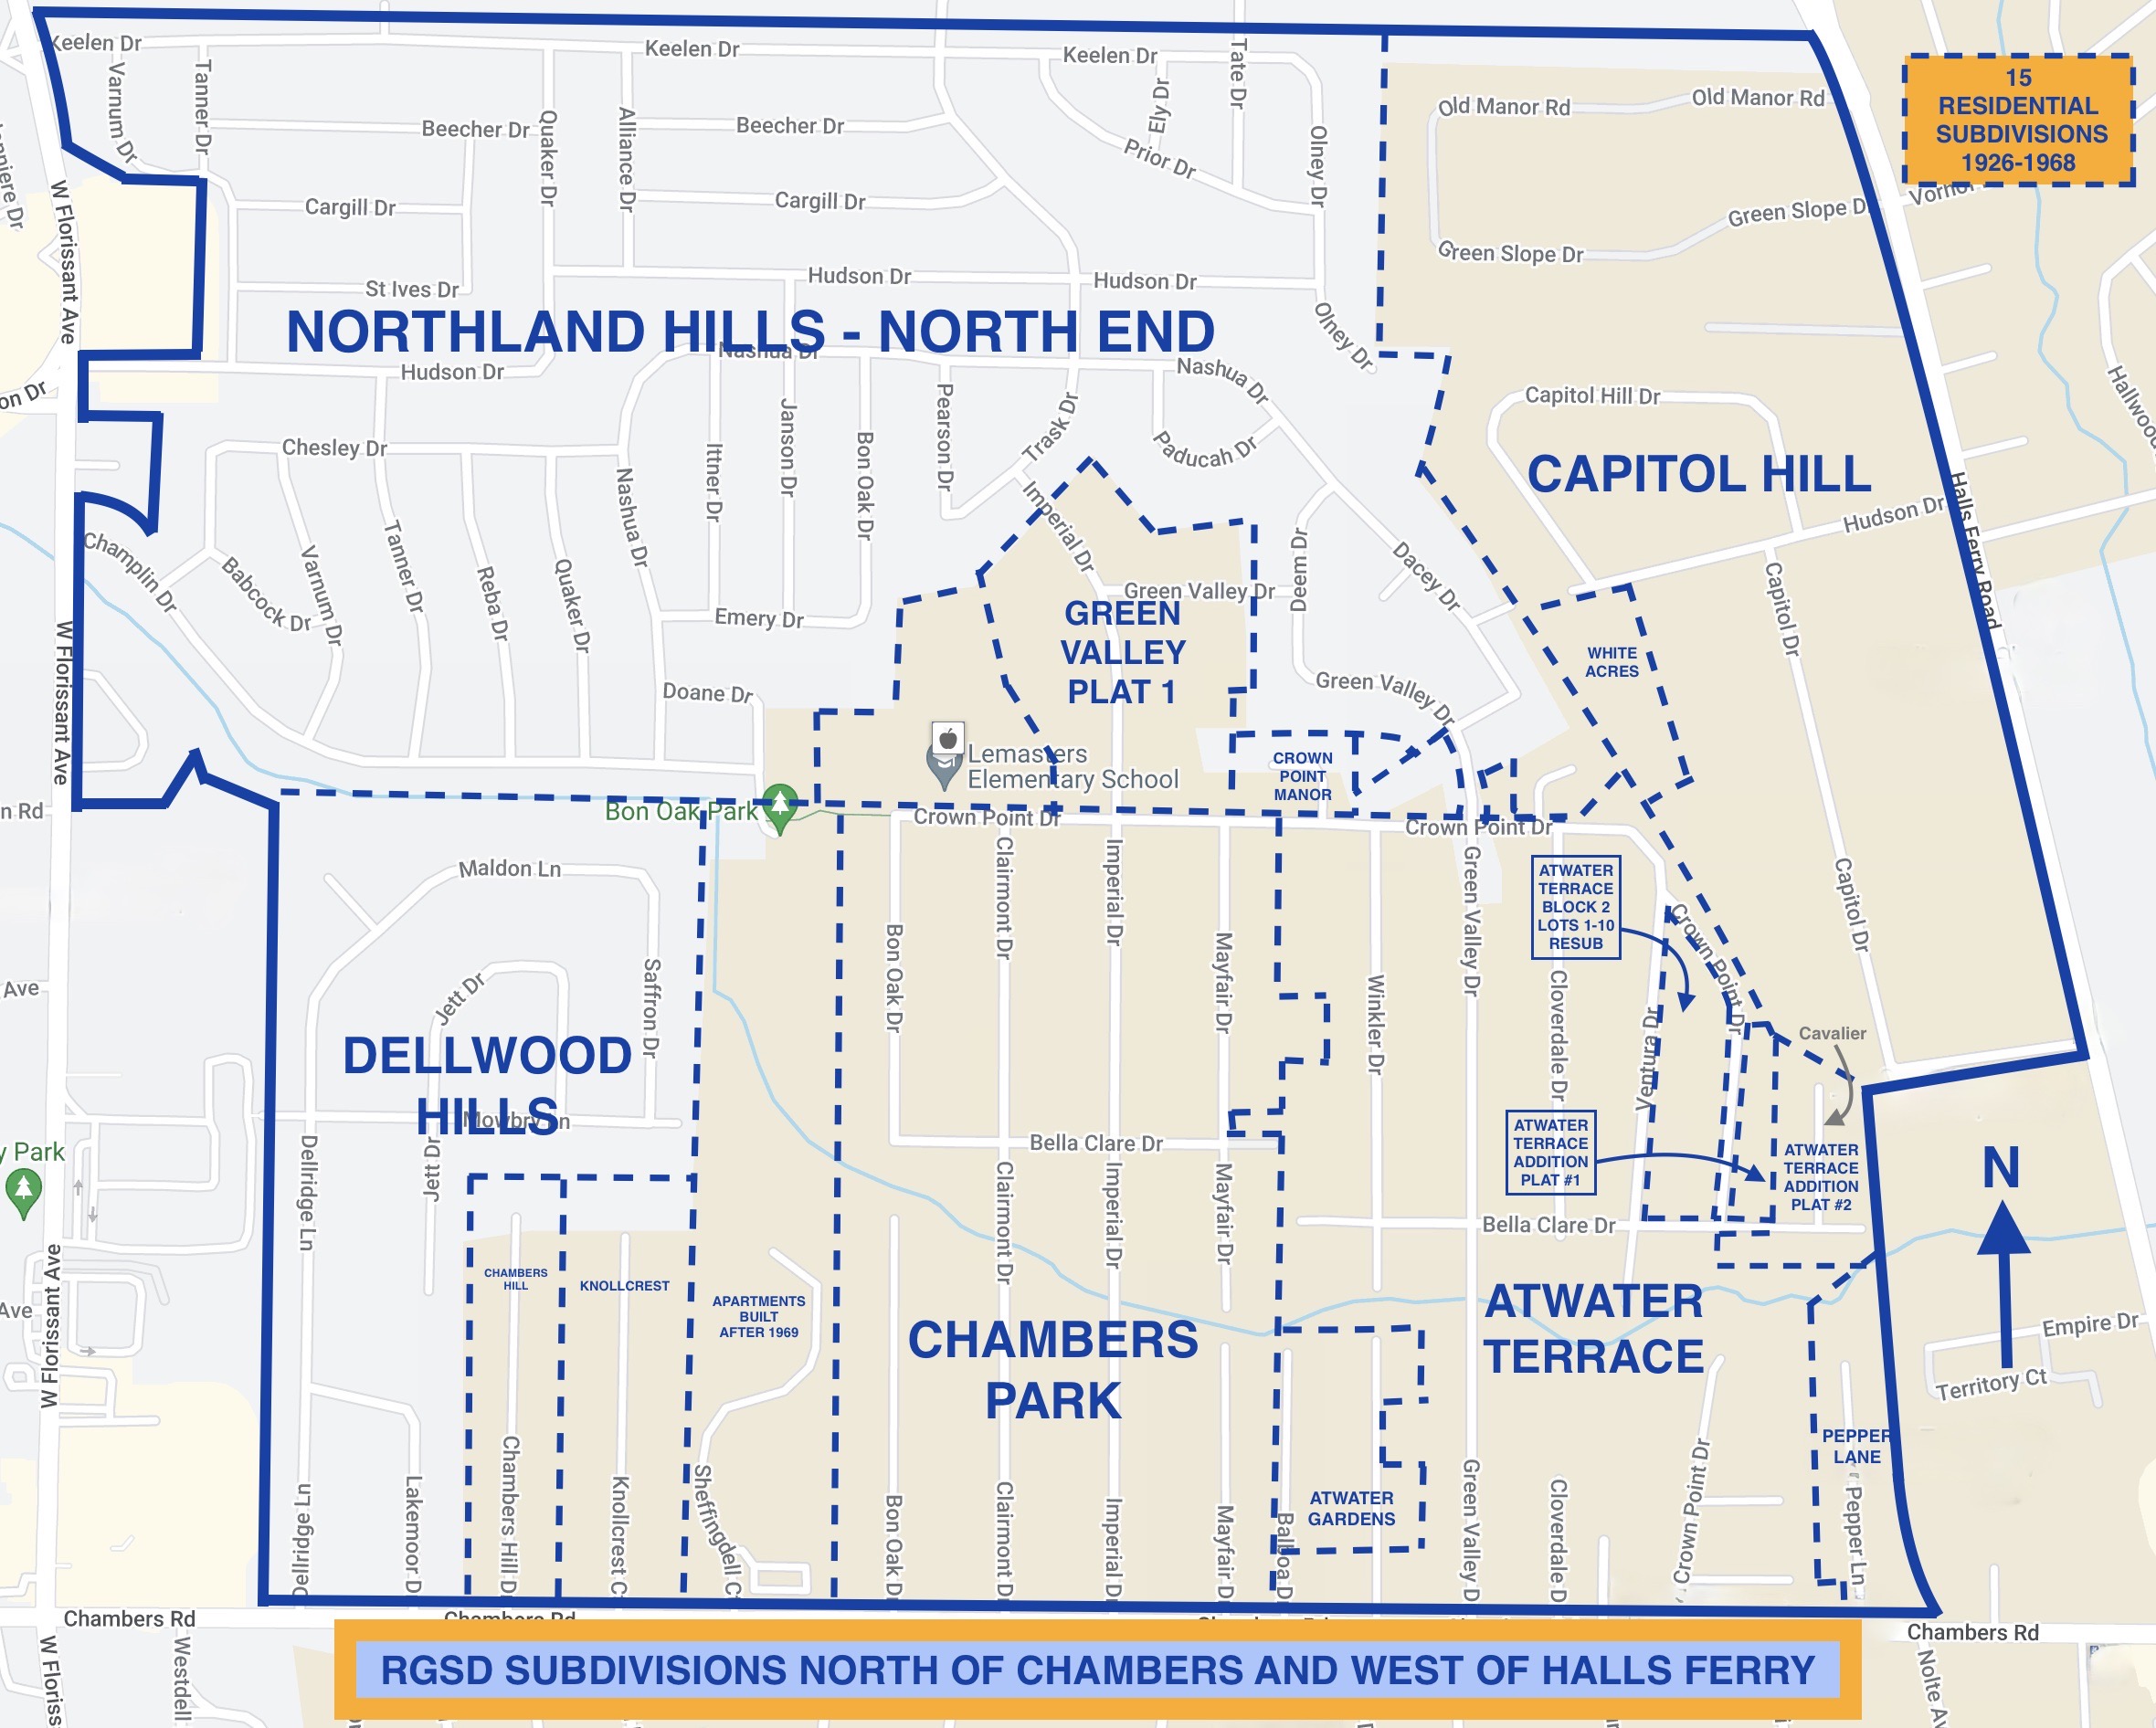 RIVERVIEW GARDENS SCHOOL DISTRICT: SUBDIVISIONS NORTH OF CHAMBERS AND WEST OF HALLS FERRY